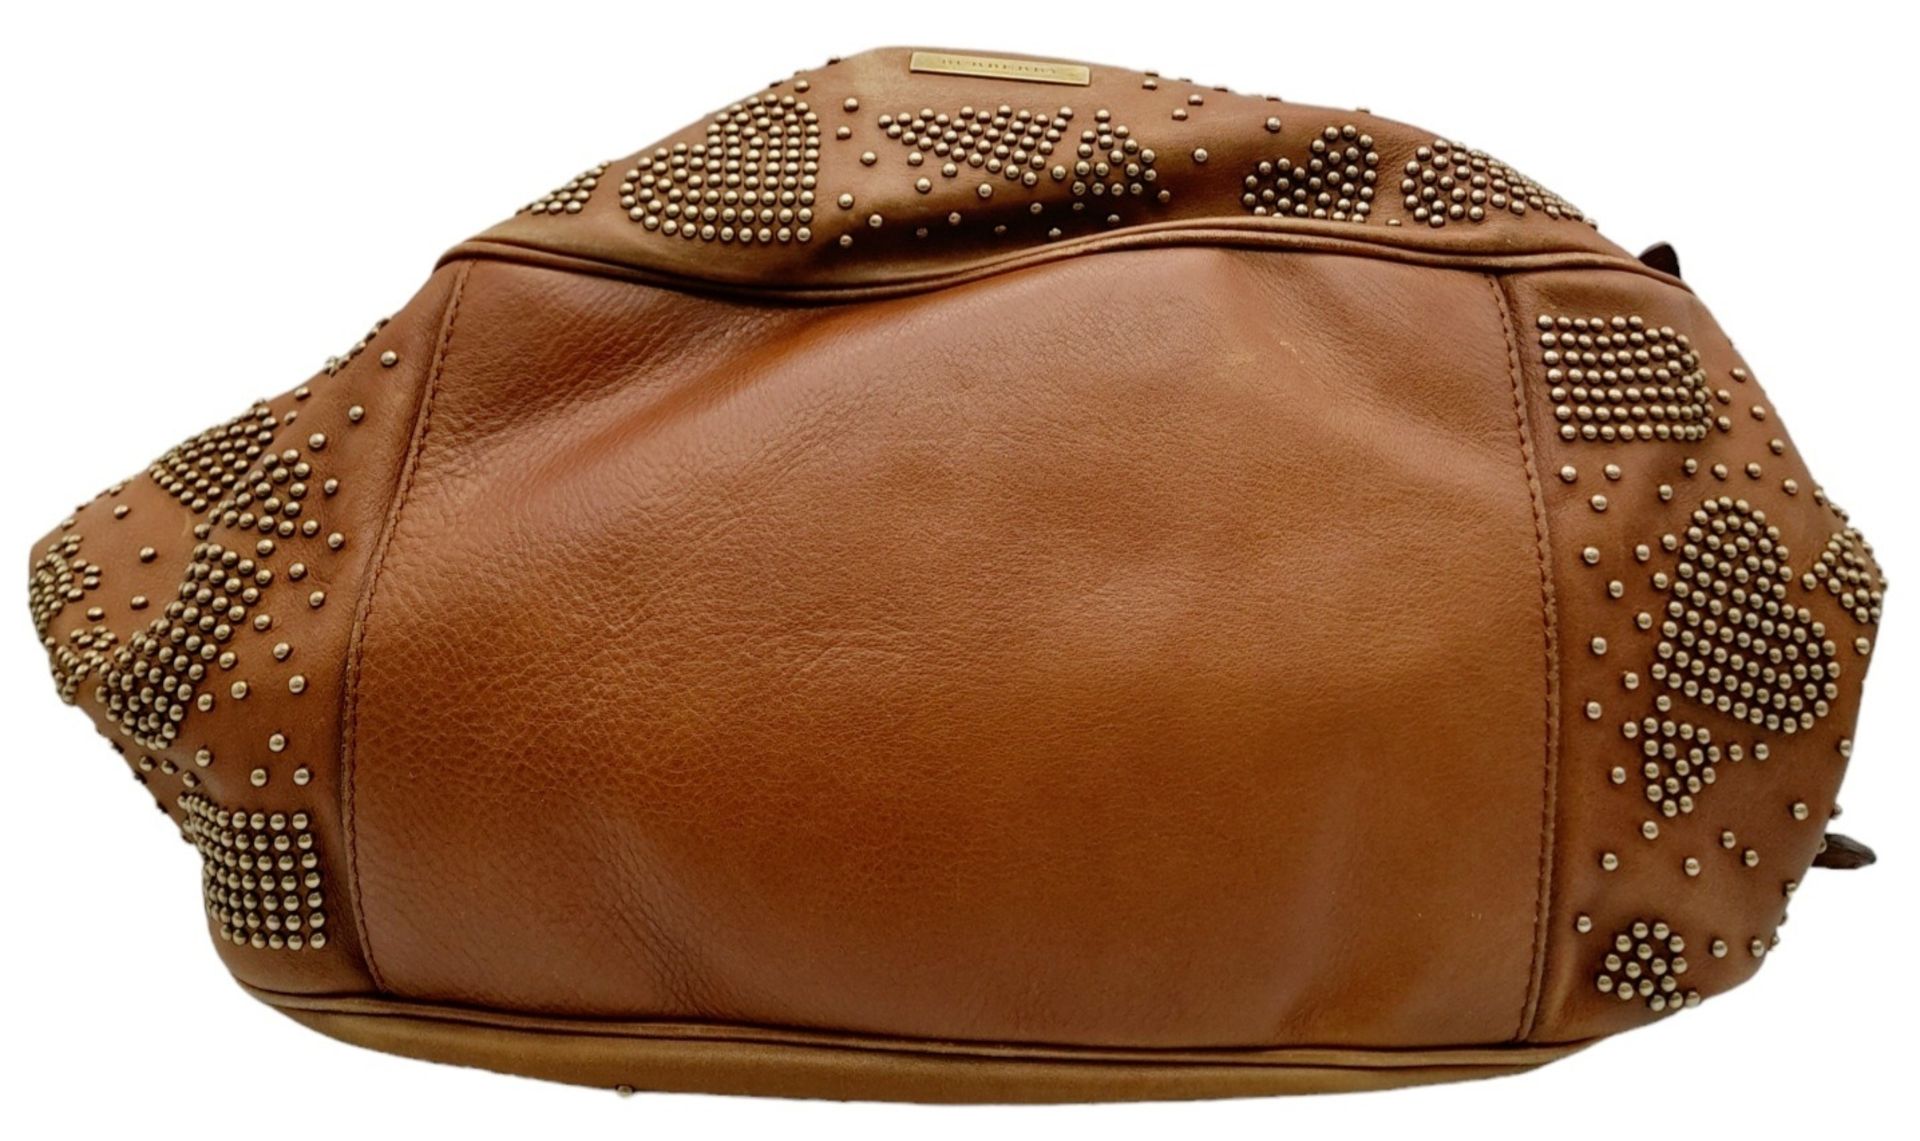 A Burberry Tan Studded Heart Hobo Bag. Leather exterior with stud embellishments, golden-toned - Image 3 of 8